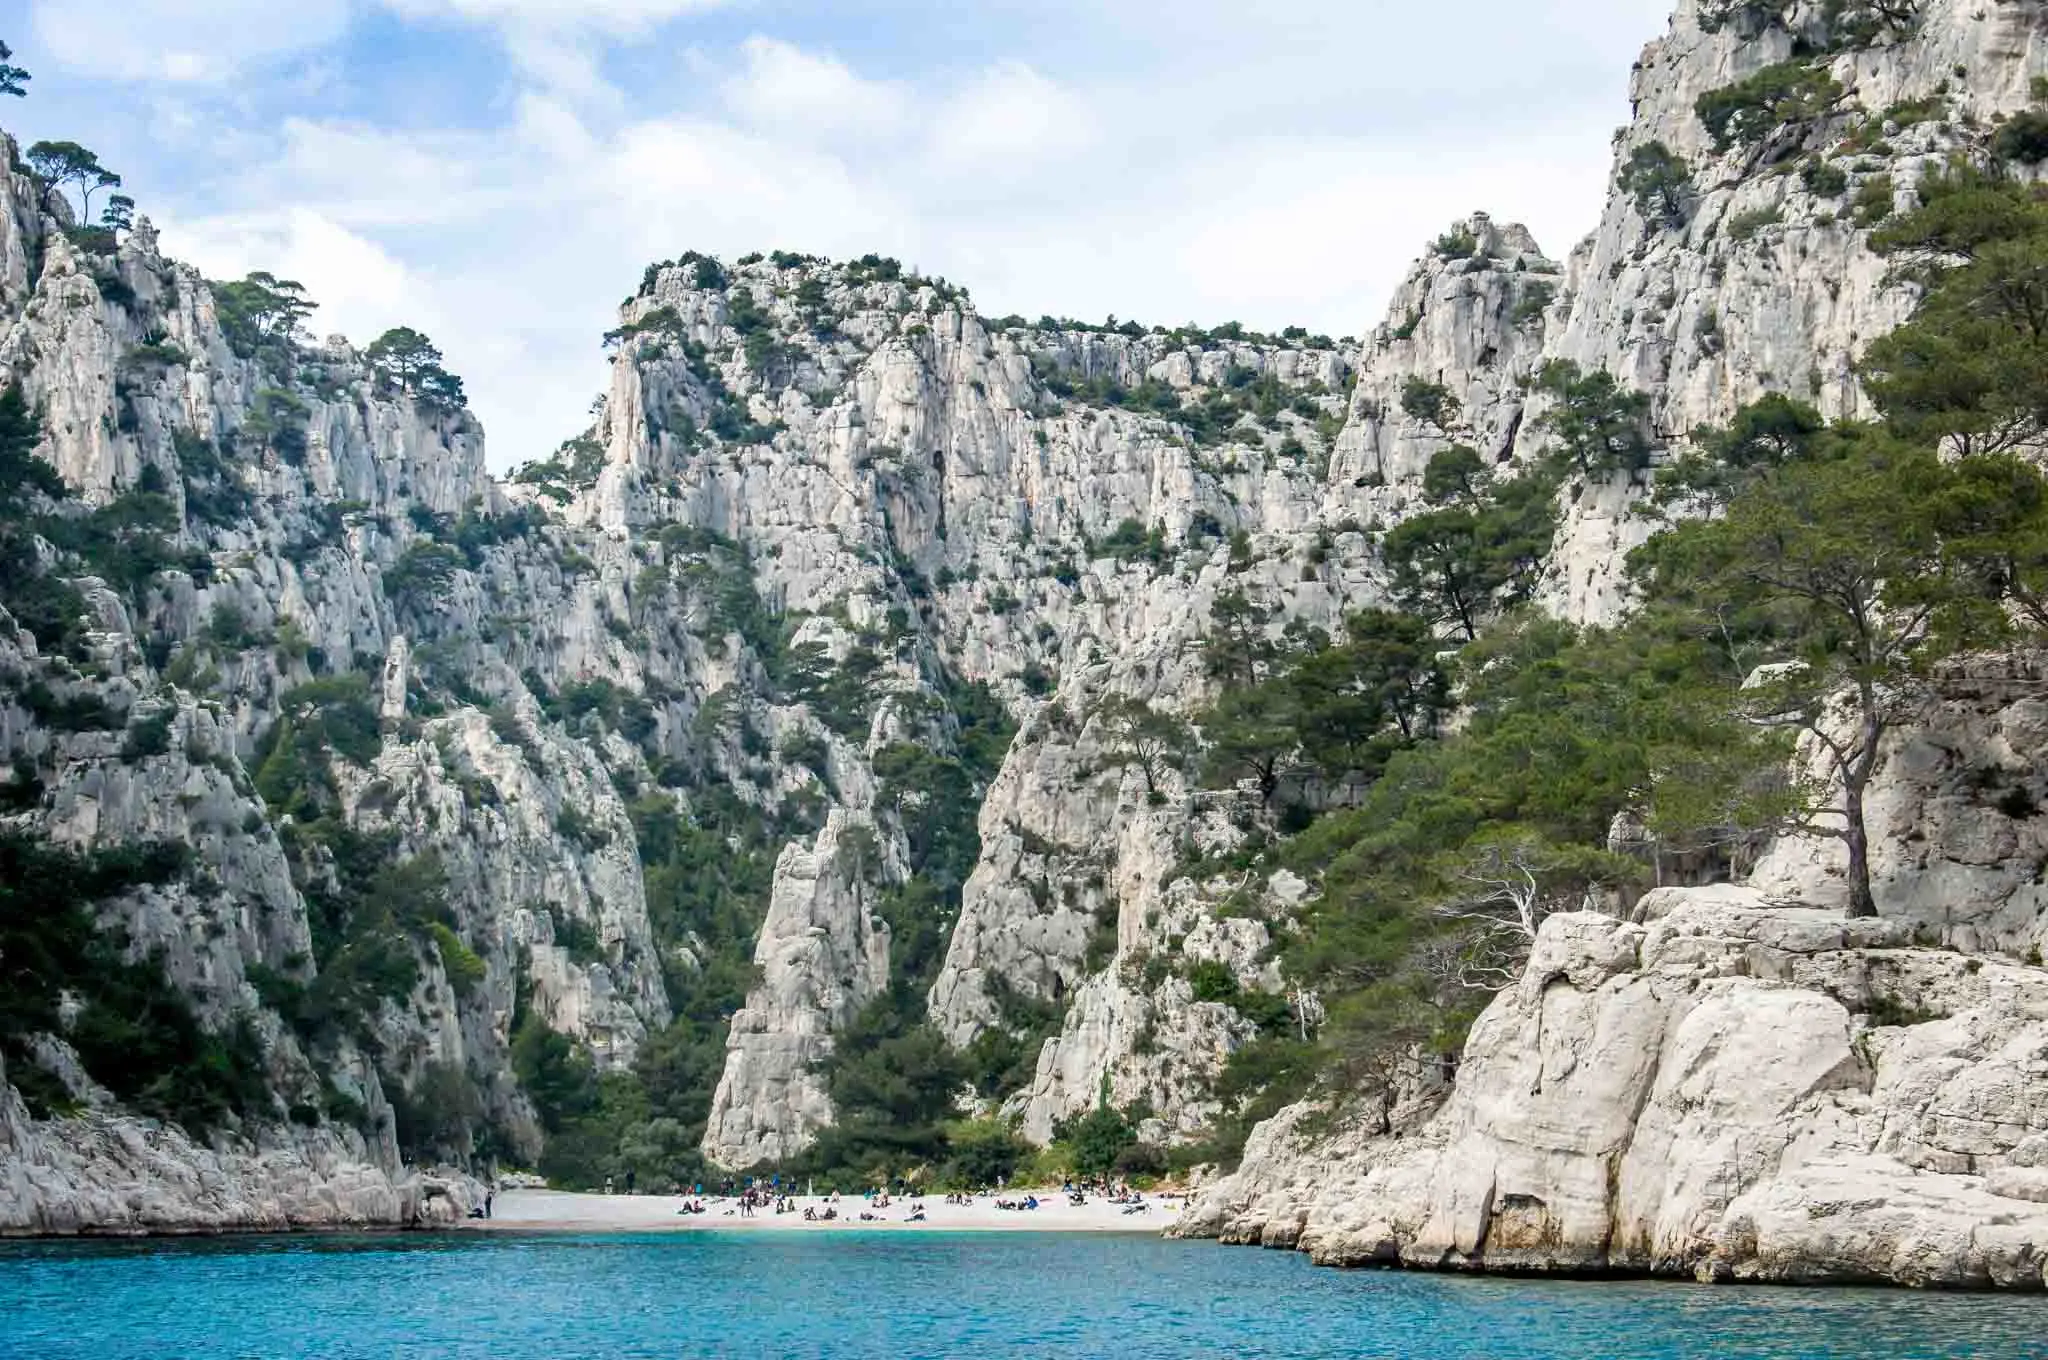 Beach in between the rocky calanques of Cassis